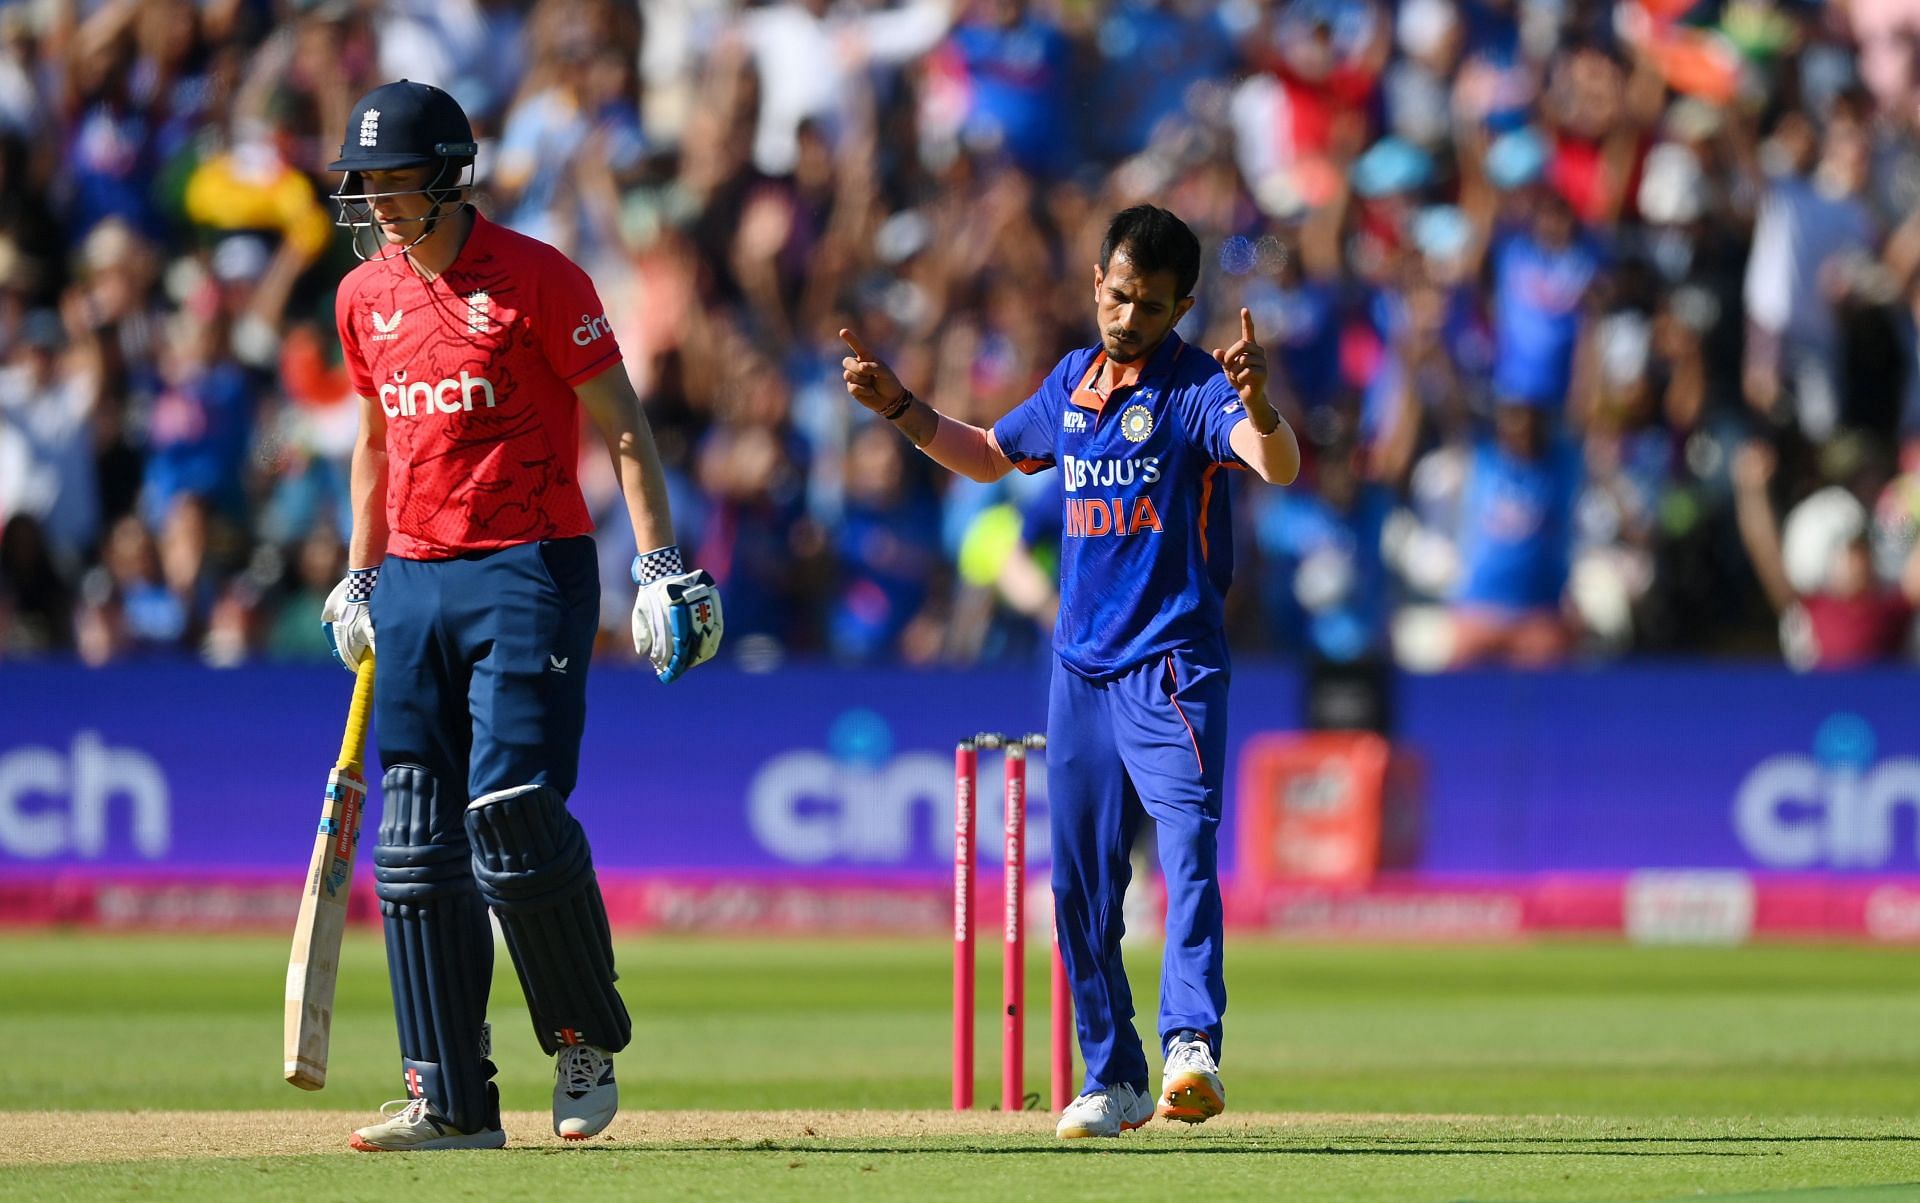 Yuzvendra Chahal has been in excellent wicket-taking form of late